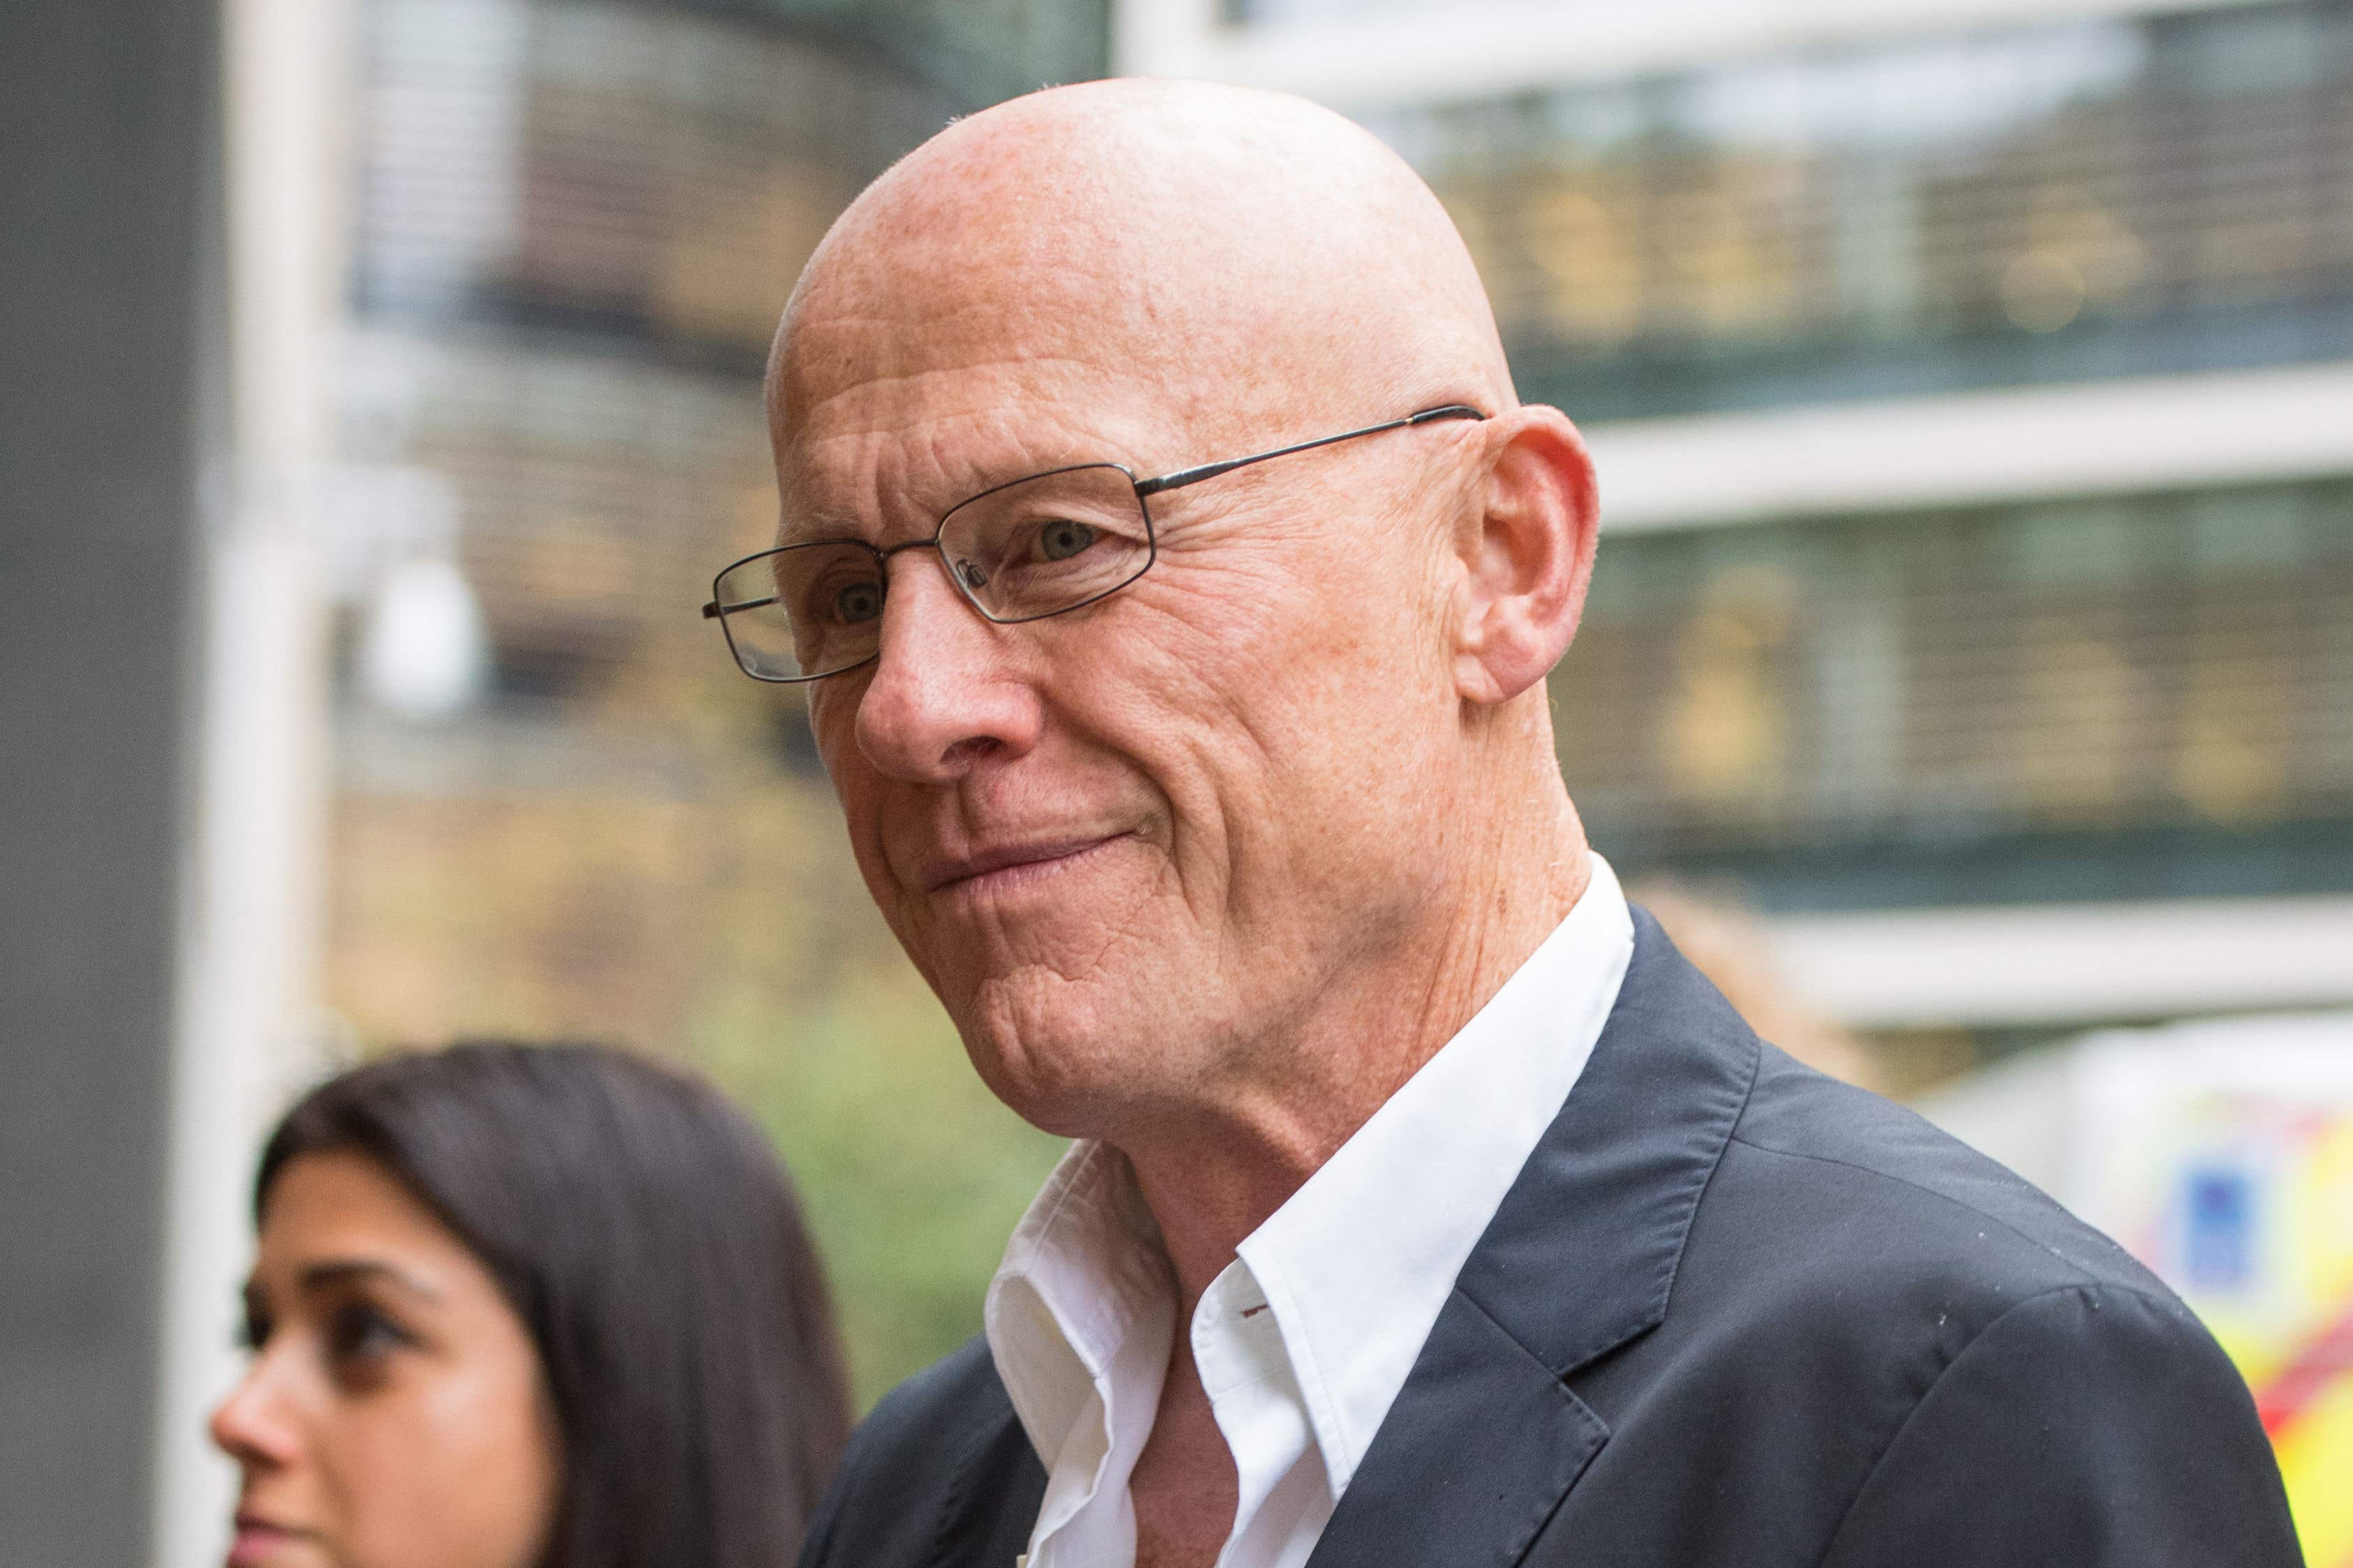 Phones4u billionaire John Caudwell has said he will be voting Labour, after donating £500,000 to the Tories in 2019 and supporting them for 51 years